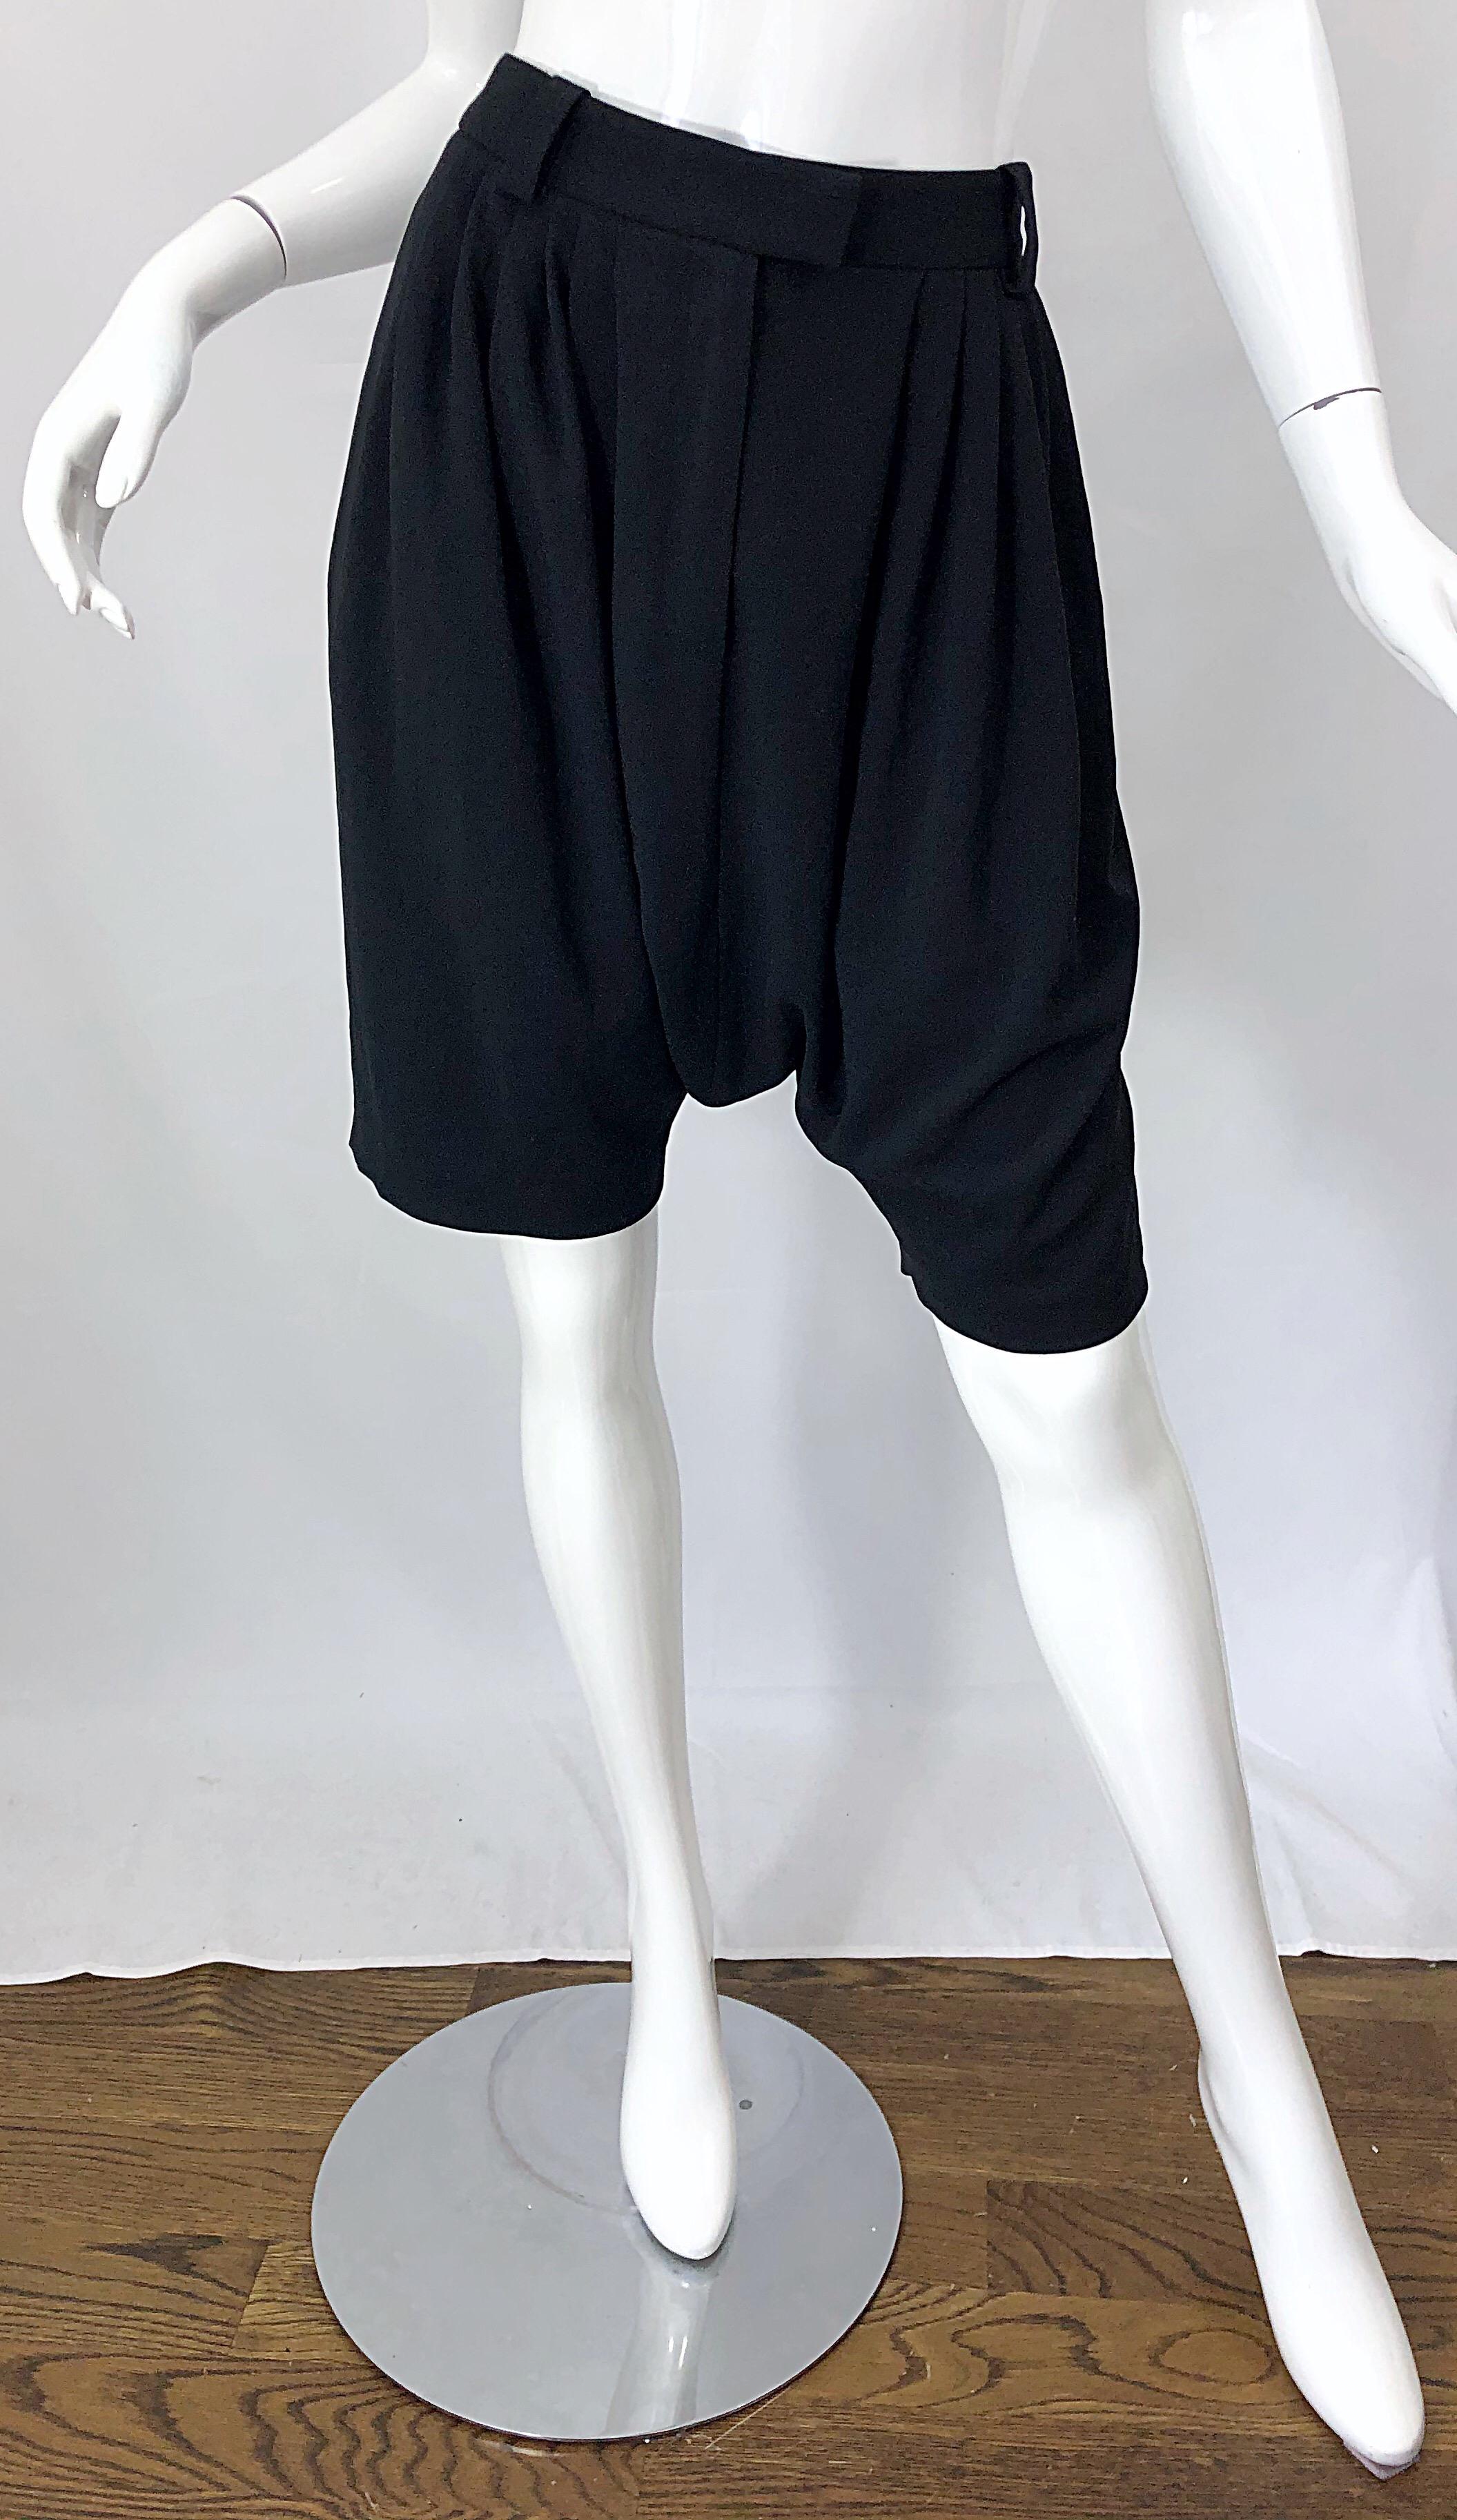 NWT Givenchy by Clare Waight Keller Size 40 / 8 Black Drop Crotch / Waist Shorts For Sale 7